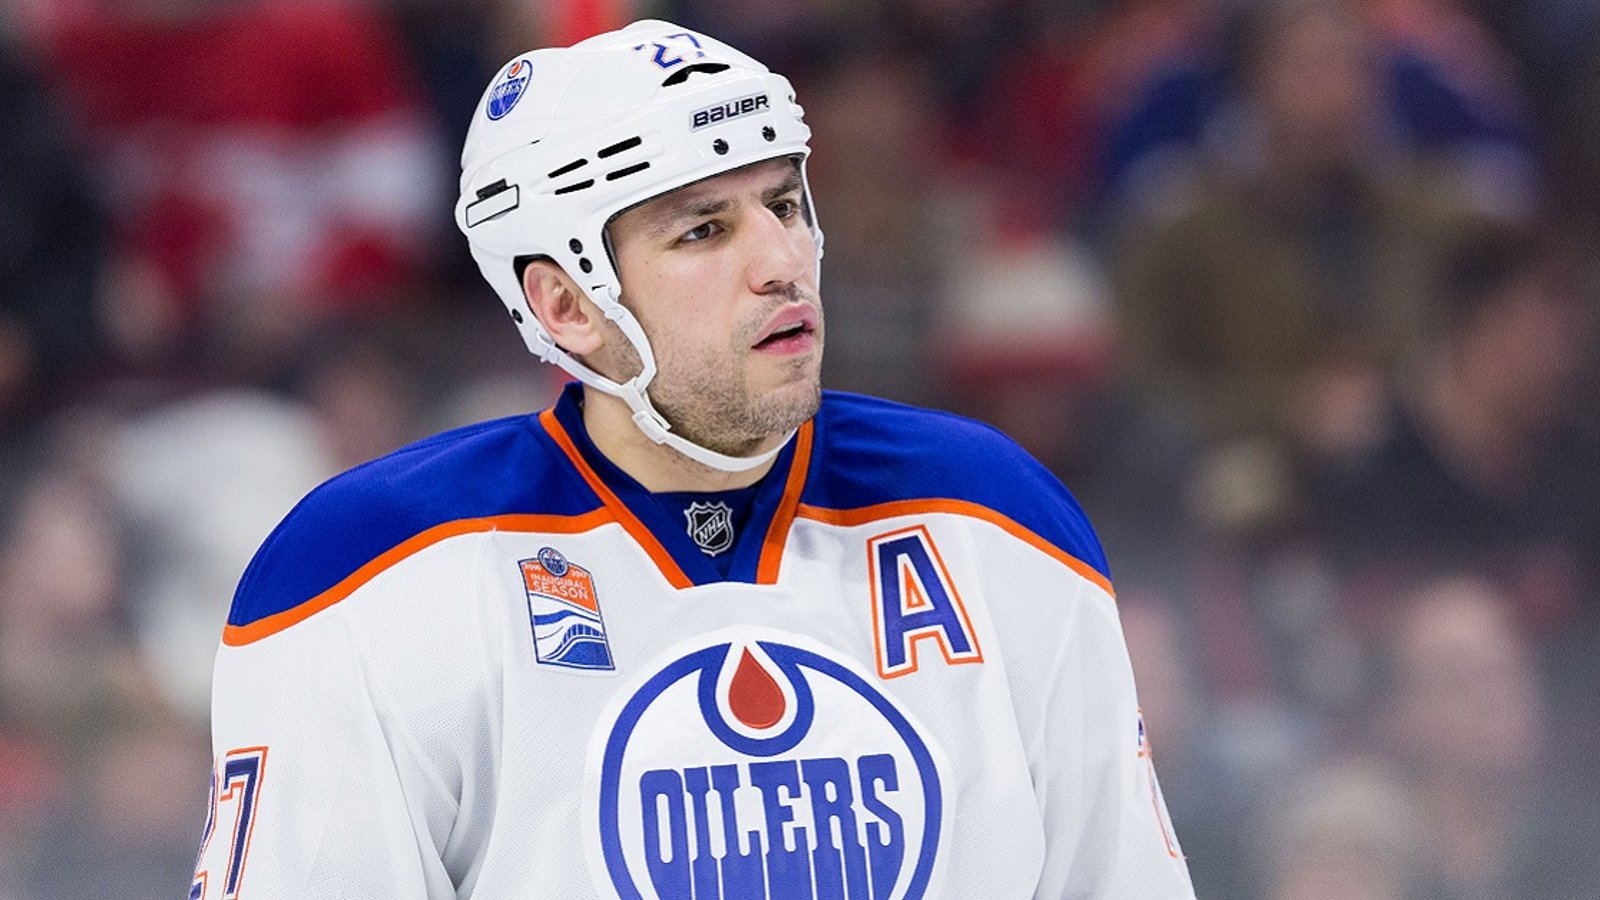 Analyst takes a damning look at this season's numbers from Milan Lucic.